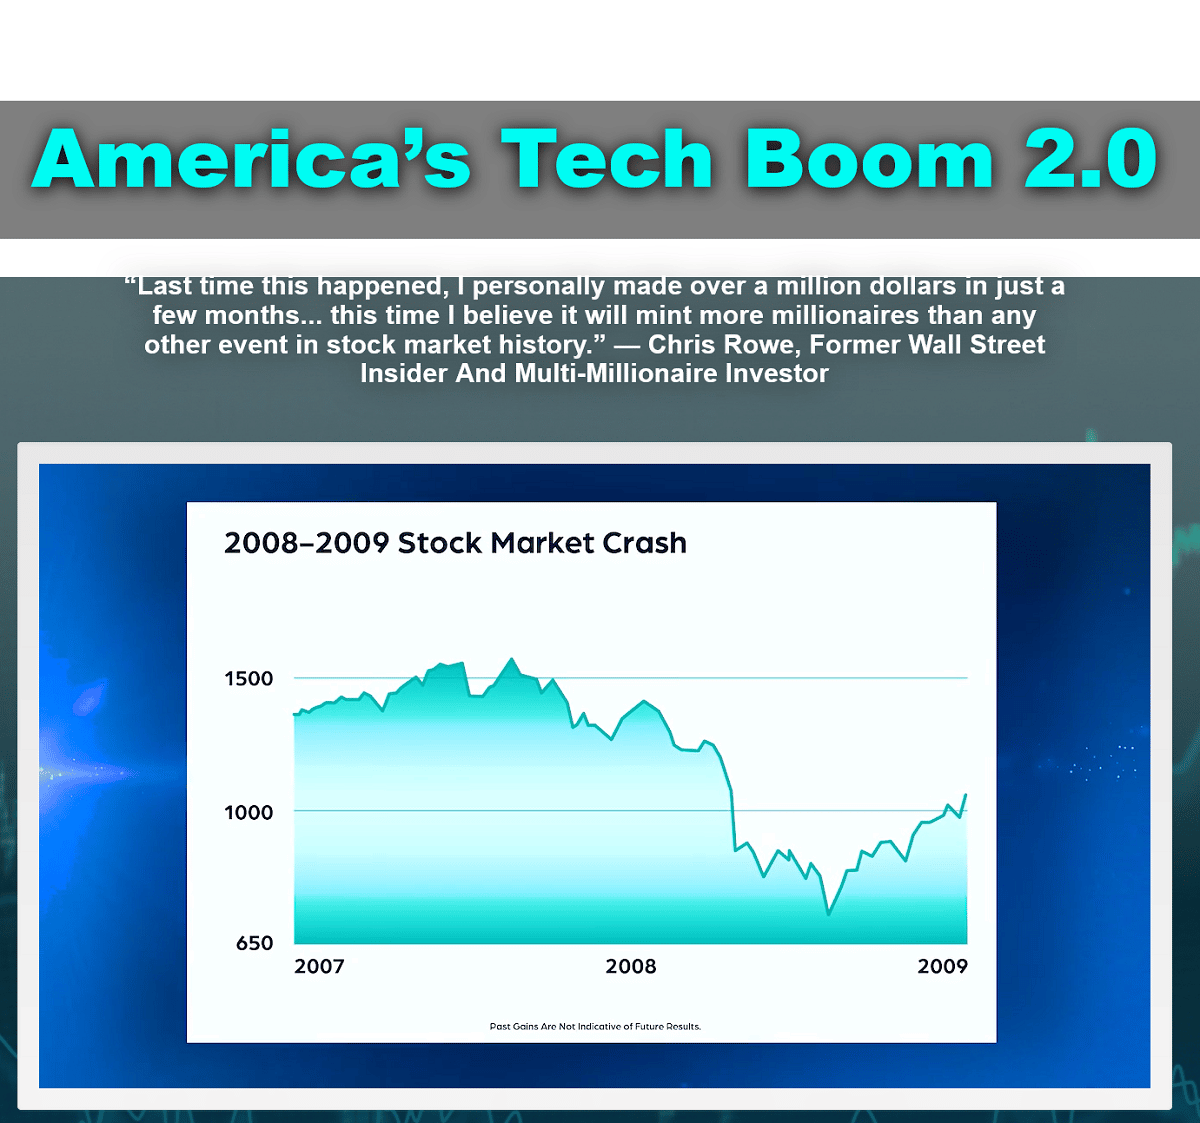 What Is America’s Tech Boom 2.0: Chris Rowe’s Sector Focus Review